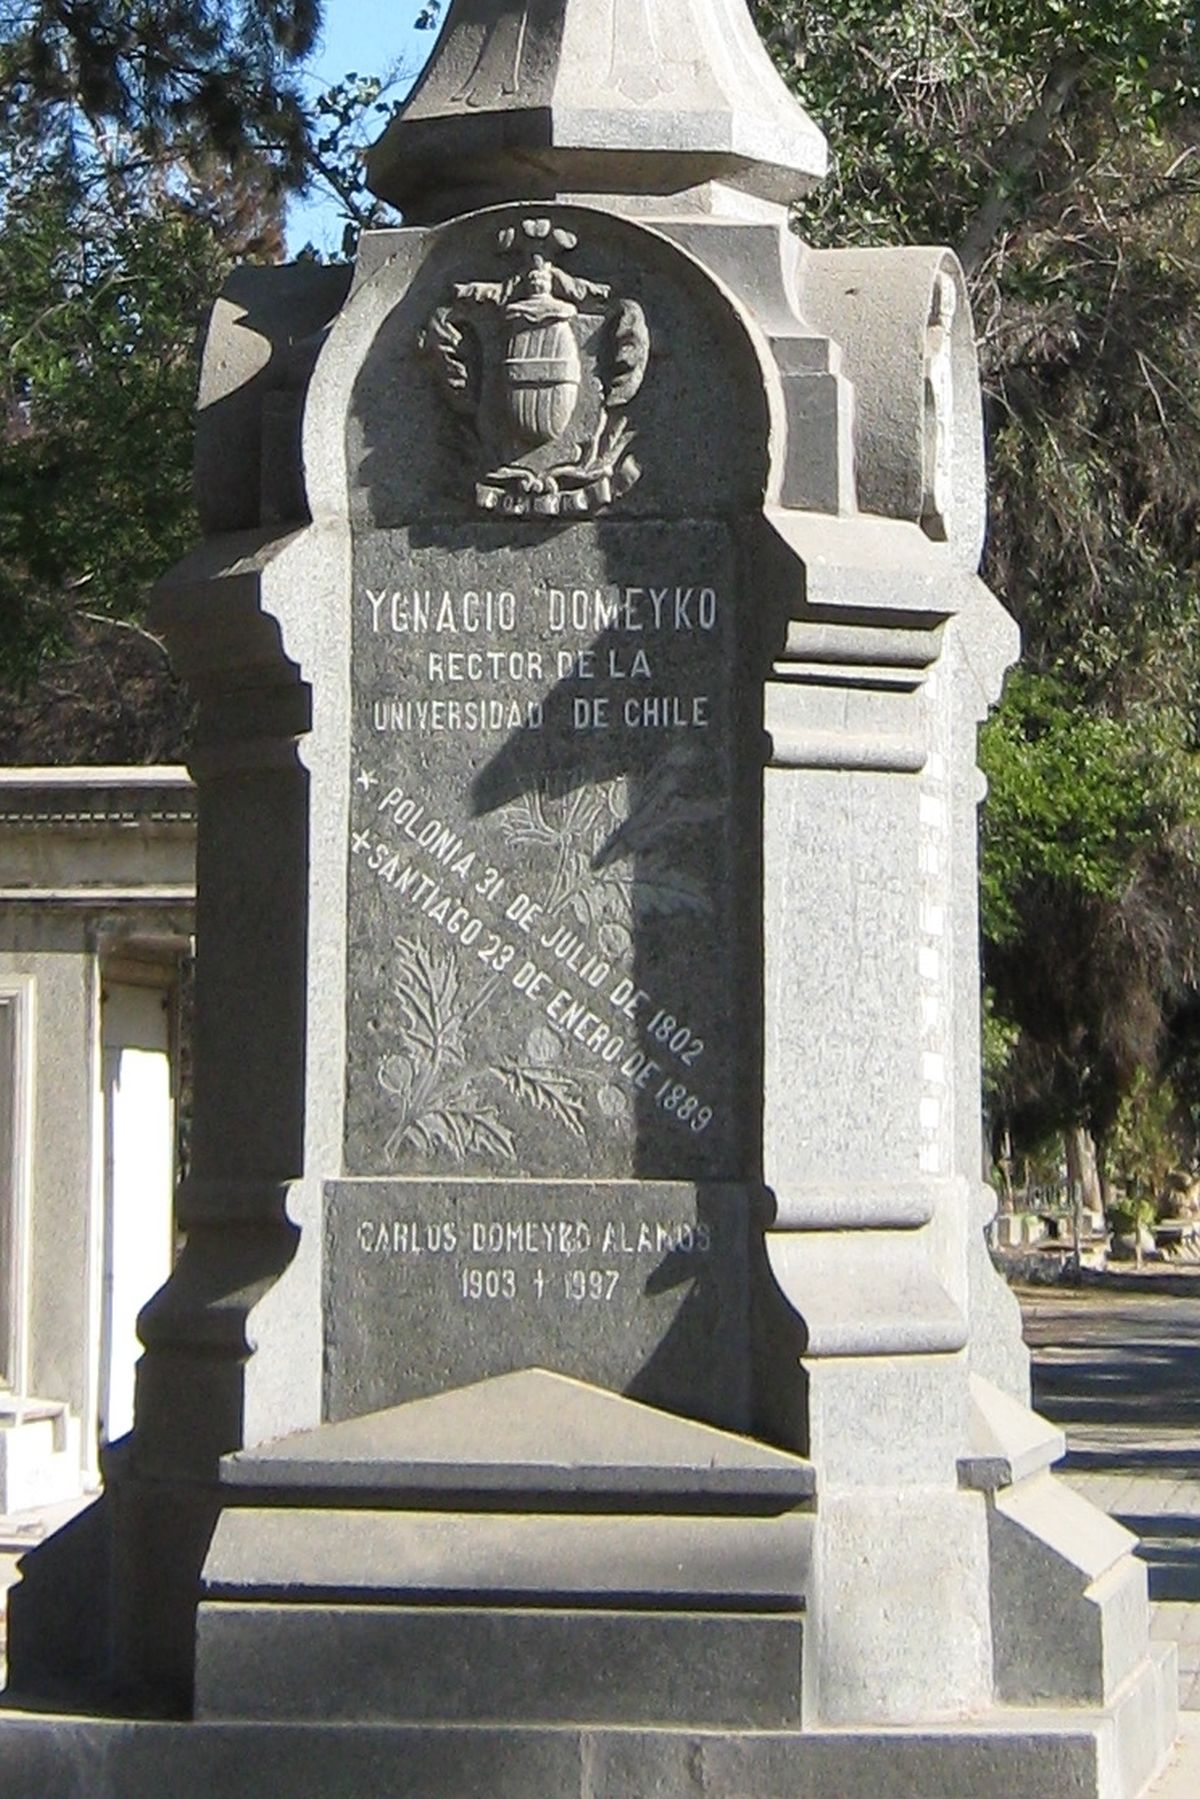 Ignatius Domeyko and his tombstone in Chile, plinth